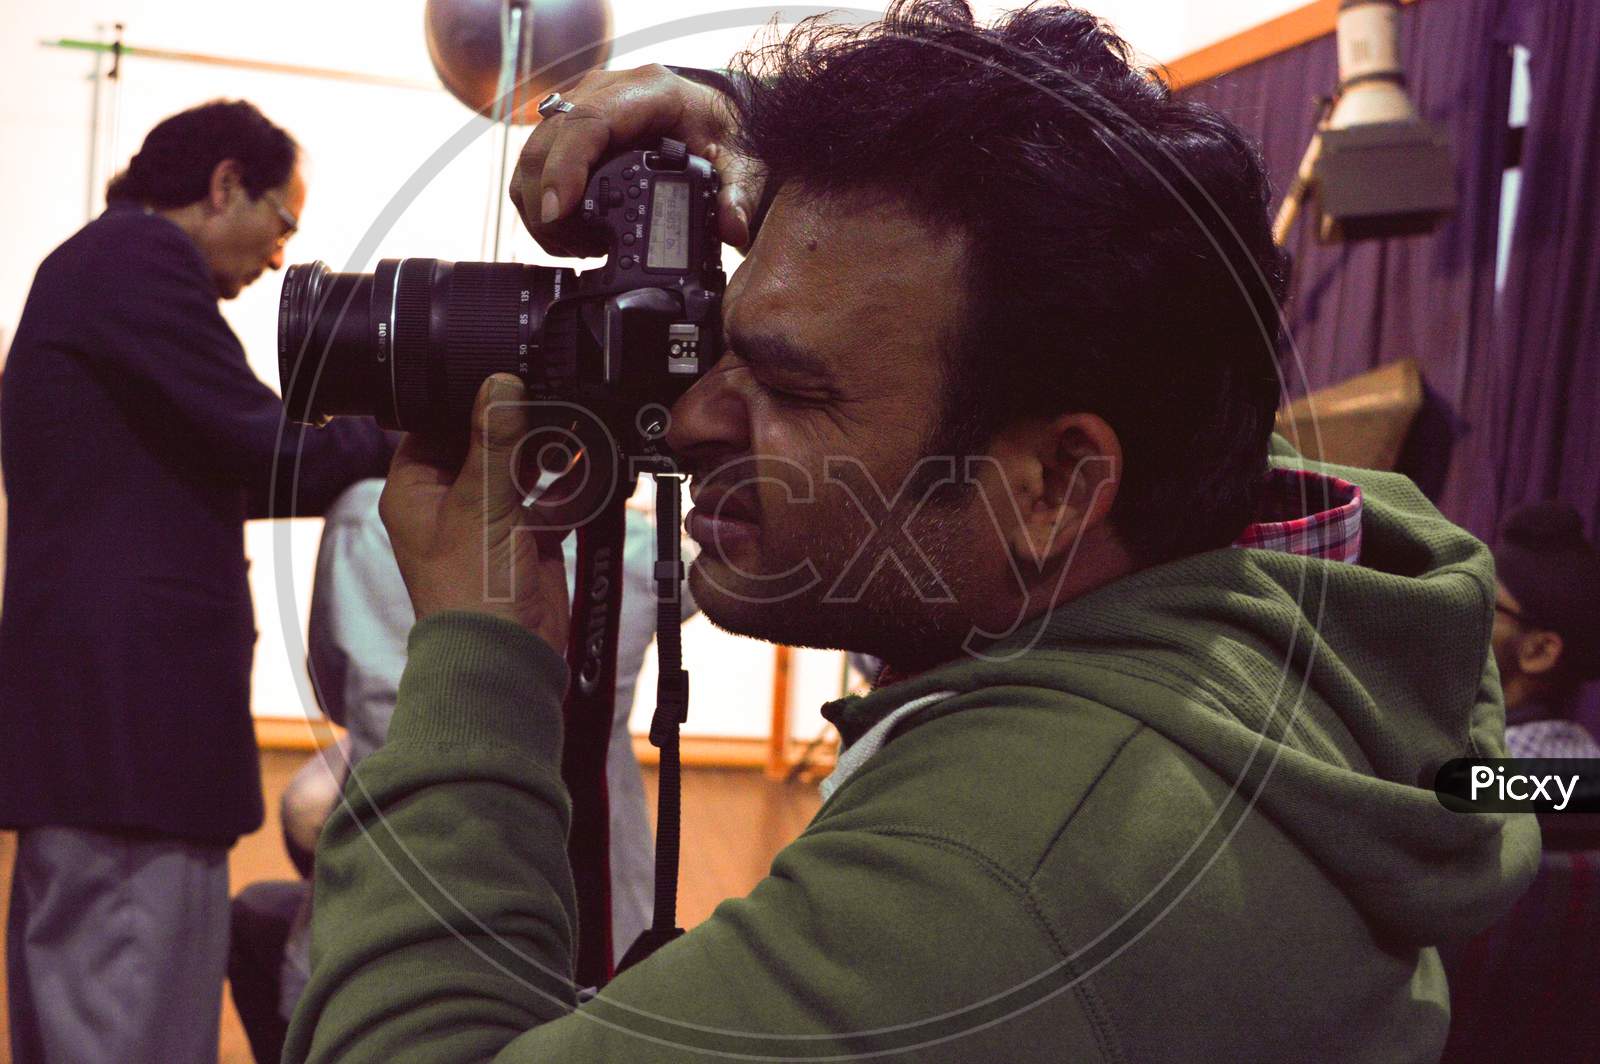 A Student Using Nikon Camera At Classroom Taking Portrait Of Others.